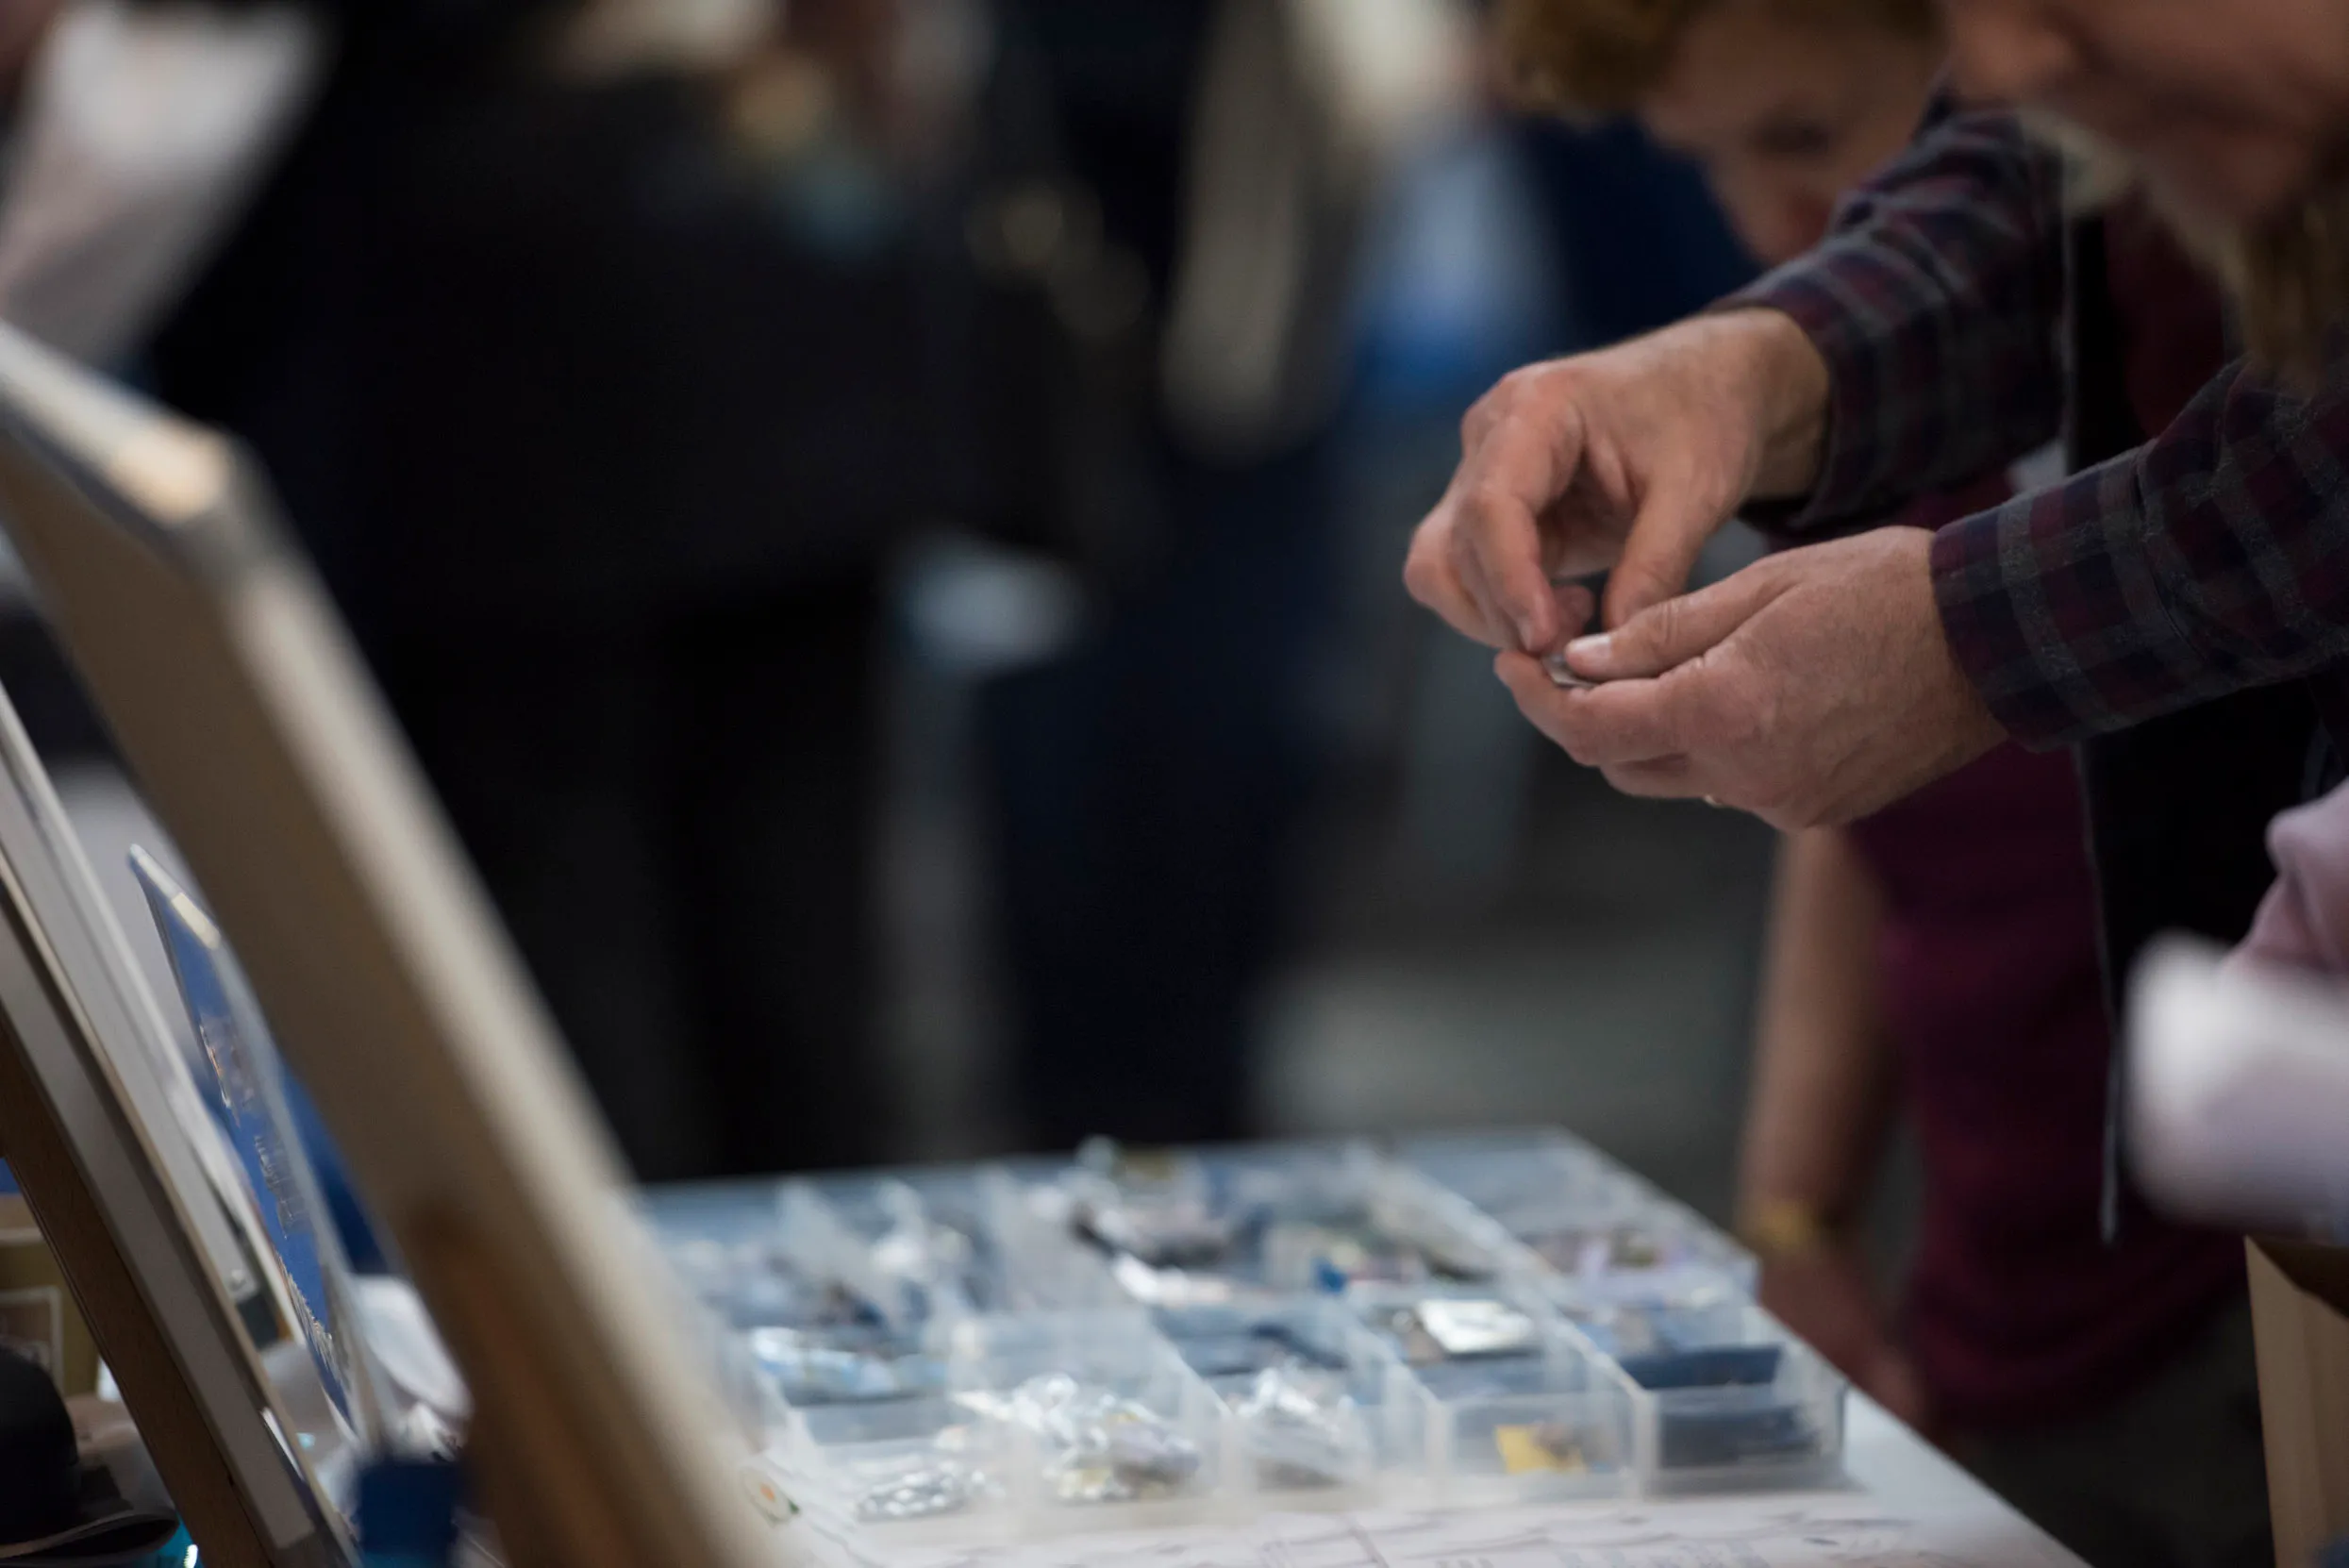 People stood at an RSPB pin badge stall, inspecting the pin badges for sale.